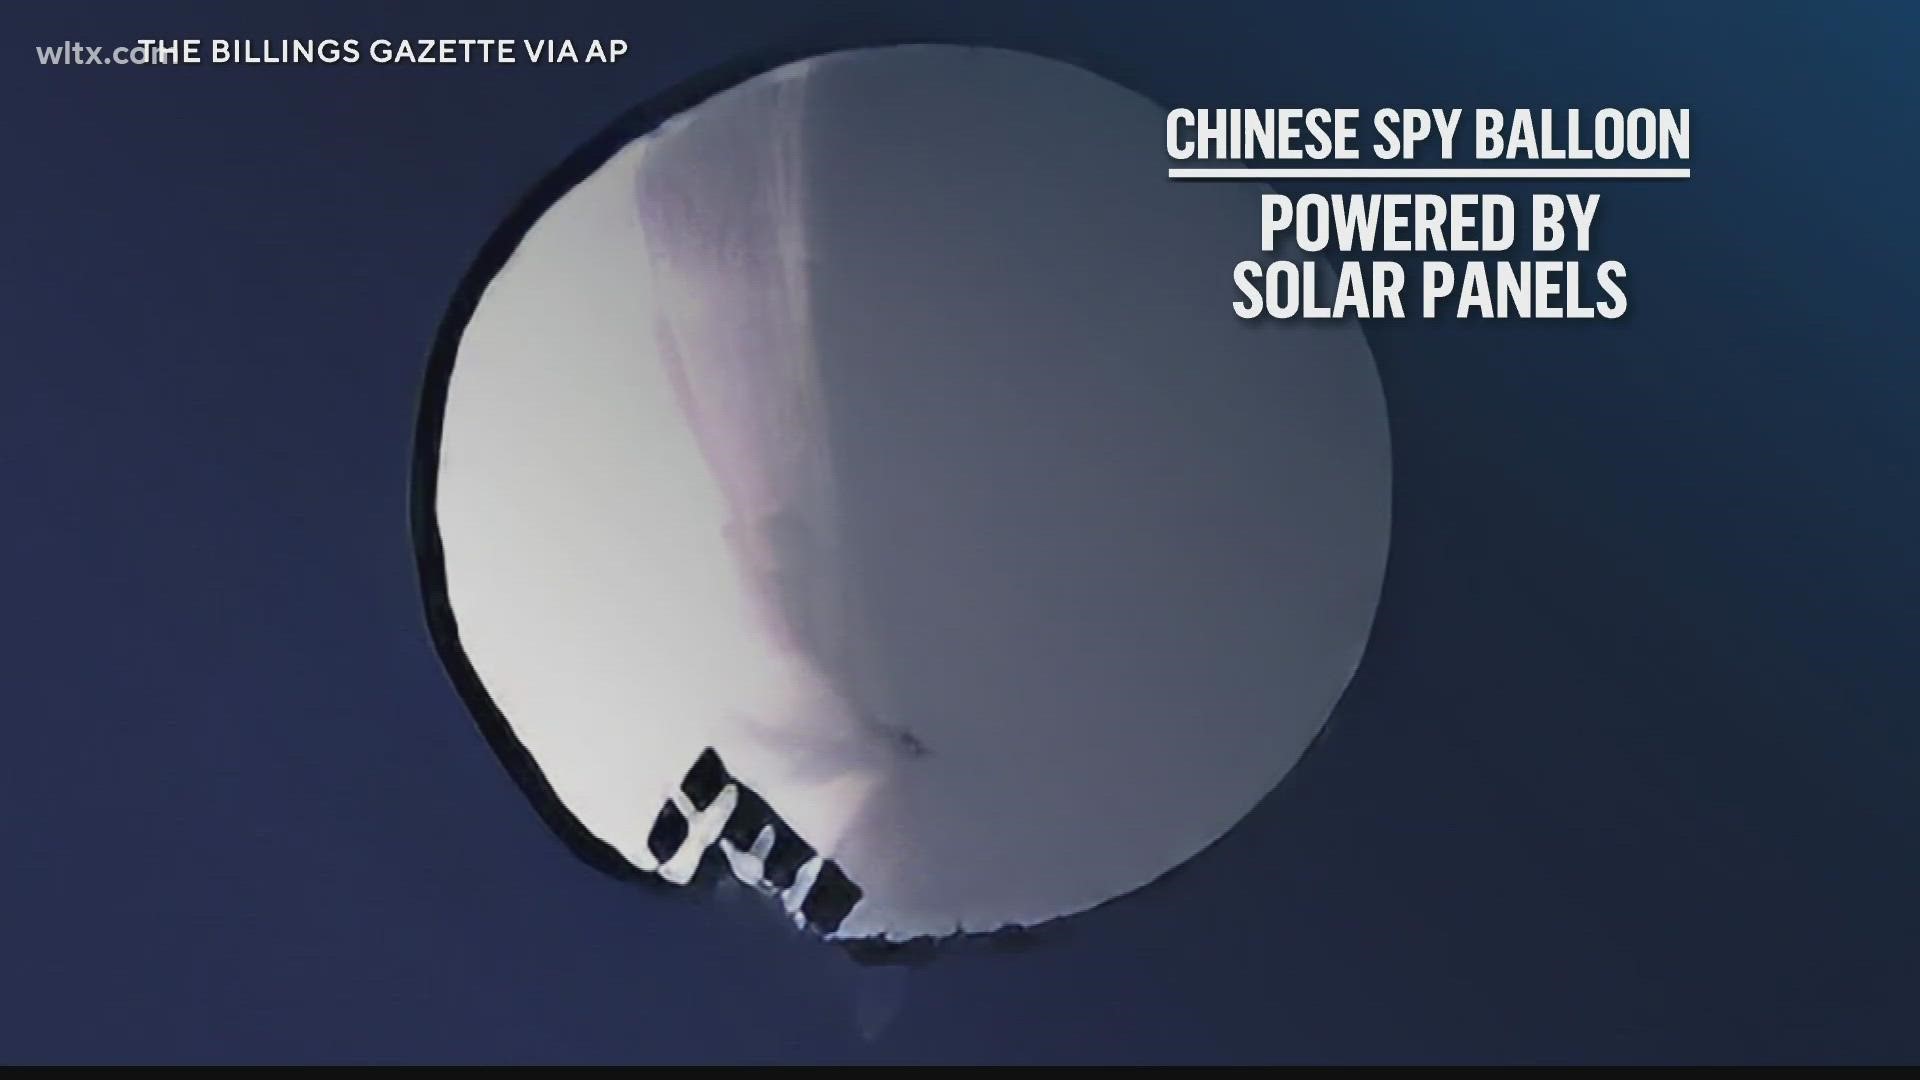 A suspected Chinese spy balloon drifting across the U.S. is carrying a payload of cameras and antennas as big as two or three school buses.